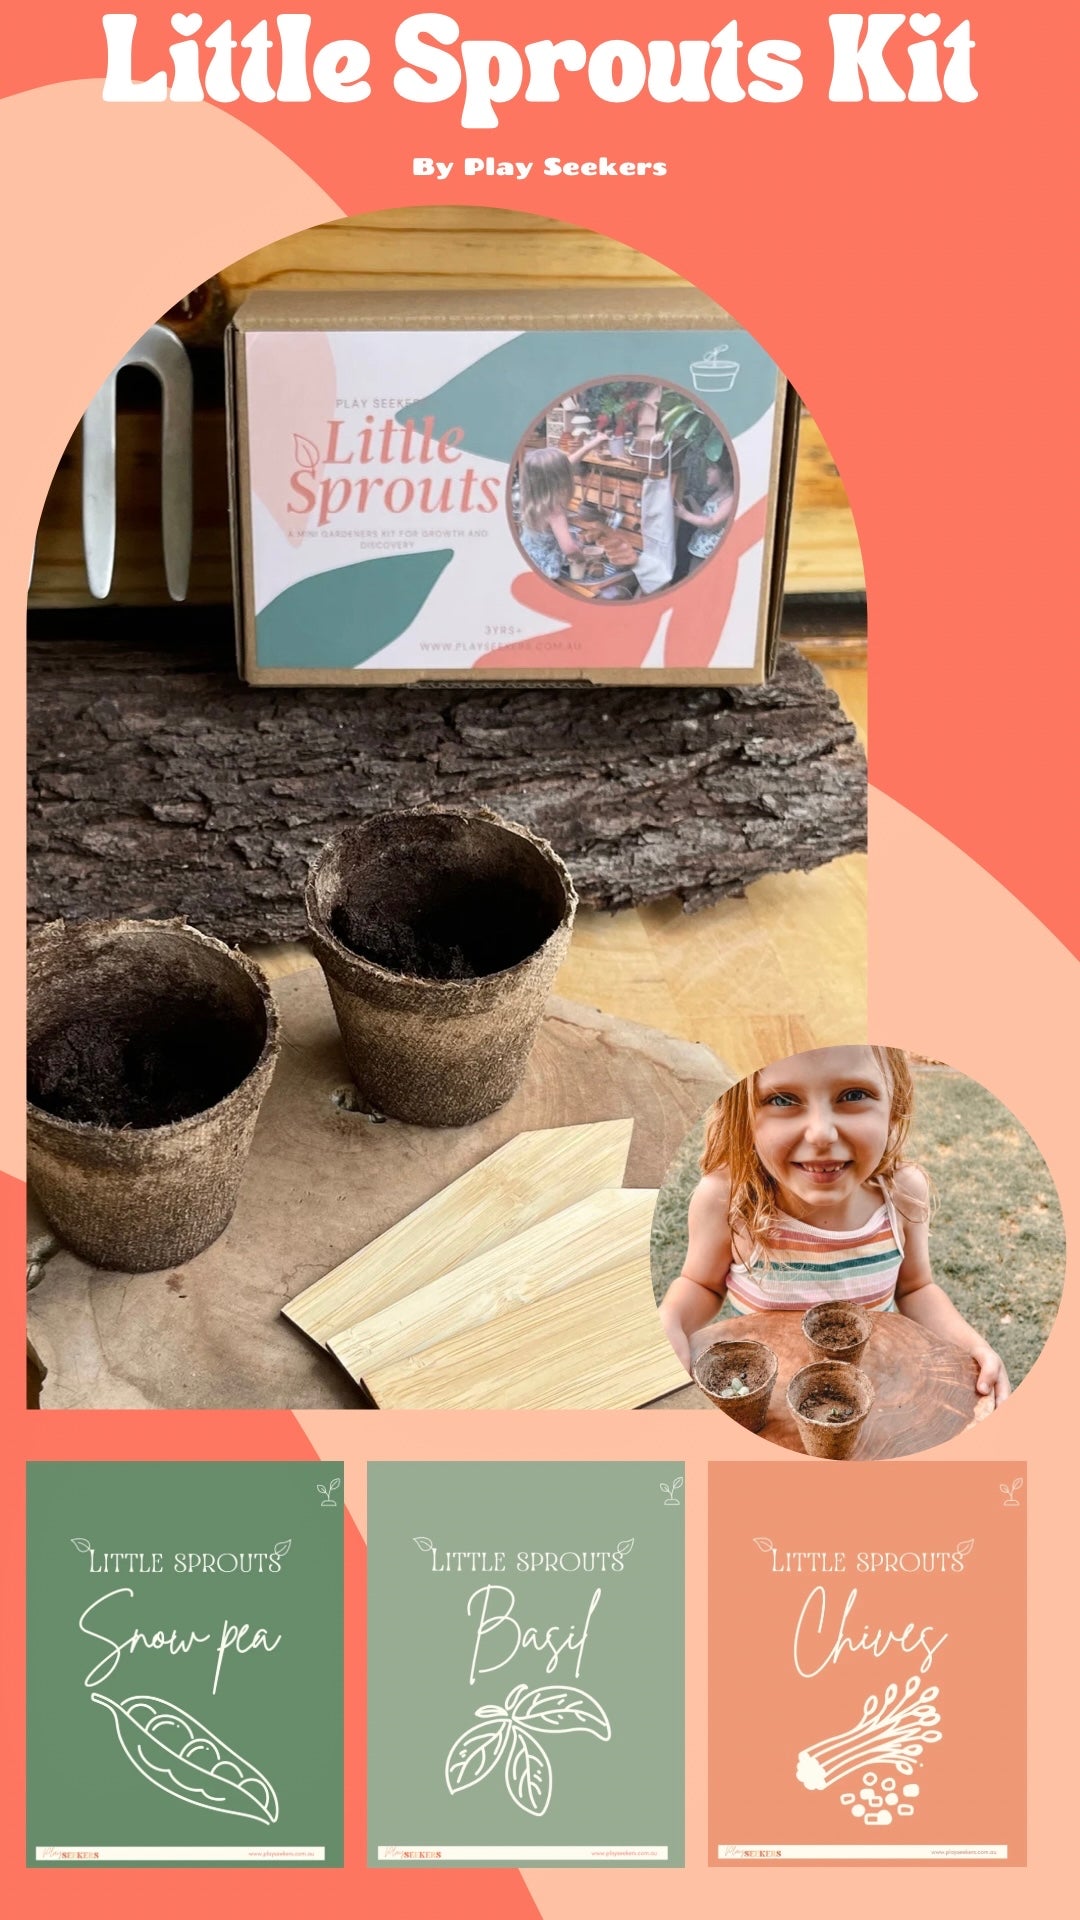 Little Sprouts Gardening Kit